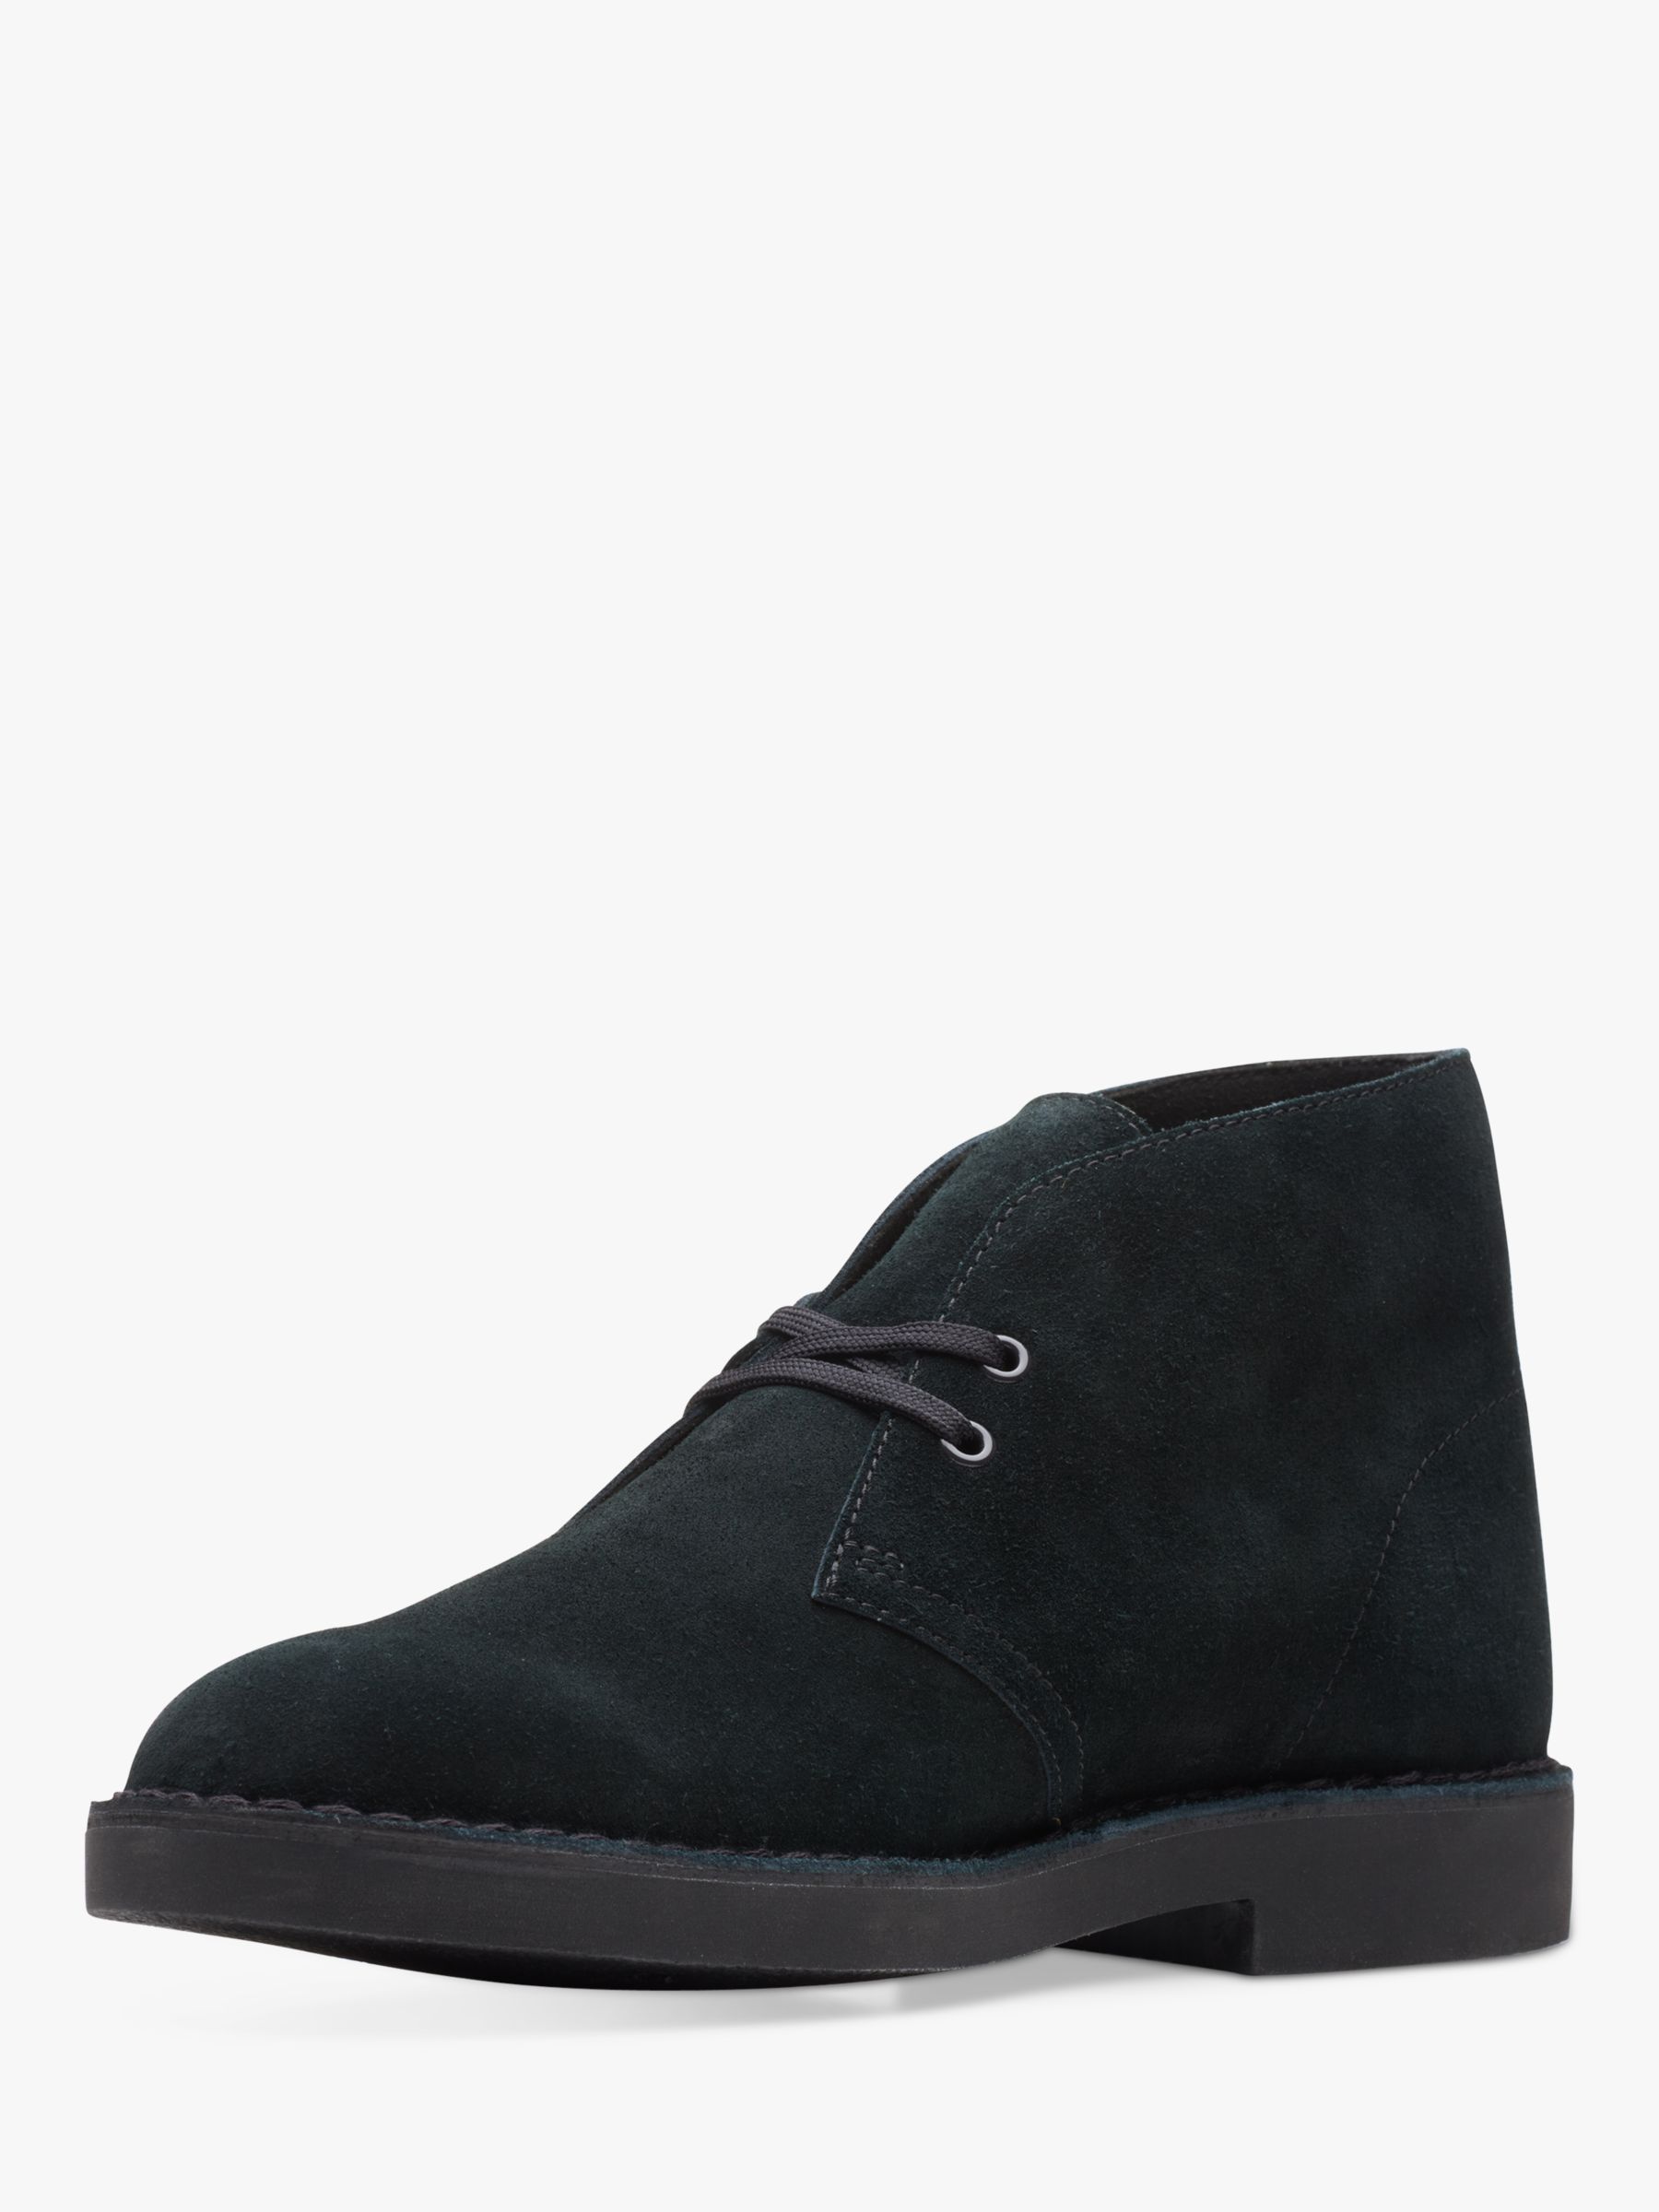 Clarks Desert Evo Suede Boots at John Lewis & Partners